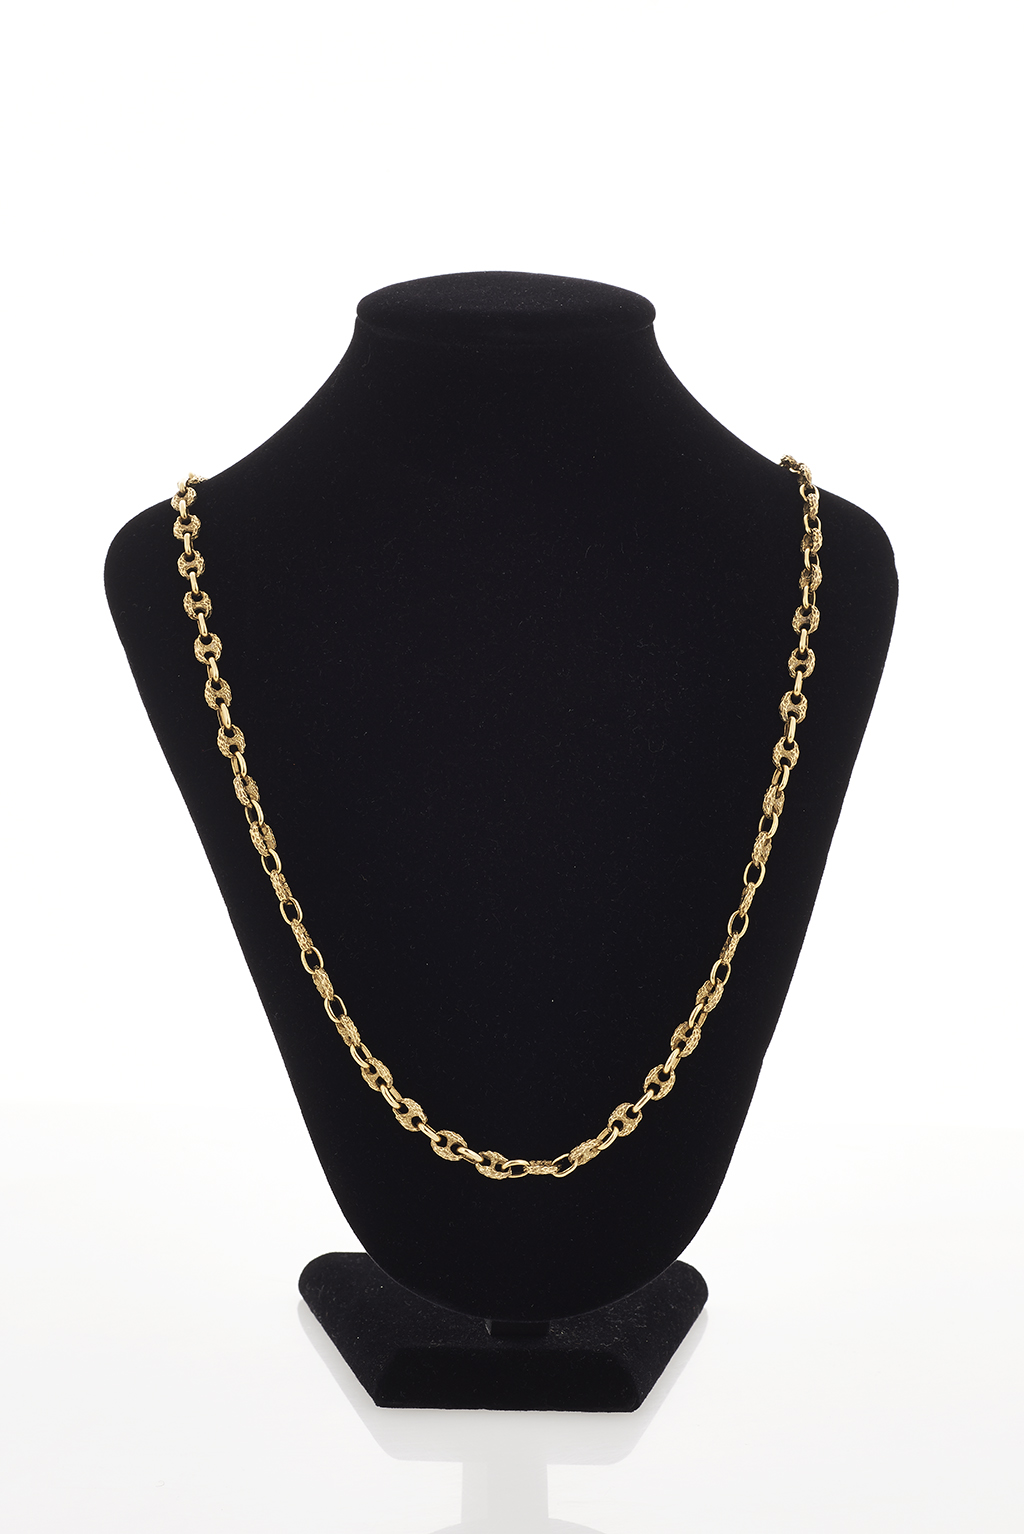 Textured Gold Link Chain - Shapiro Auctioneers